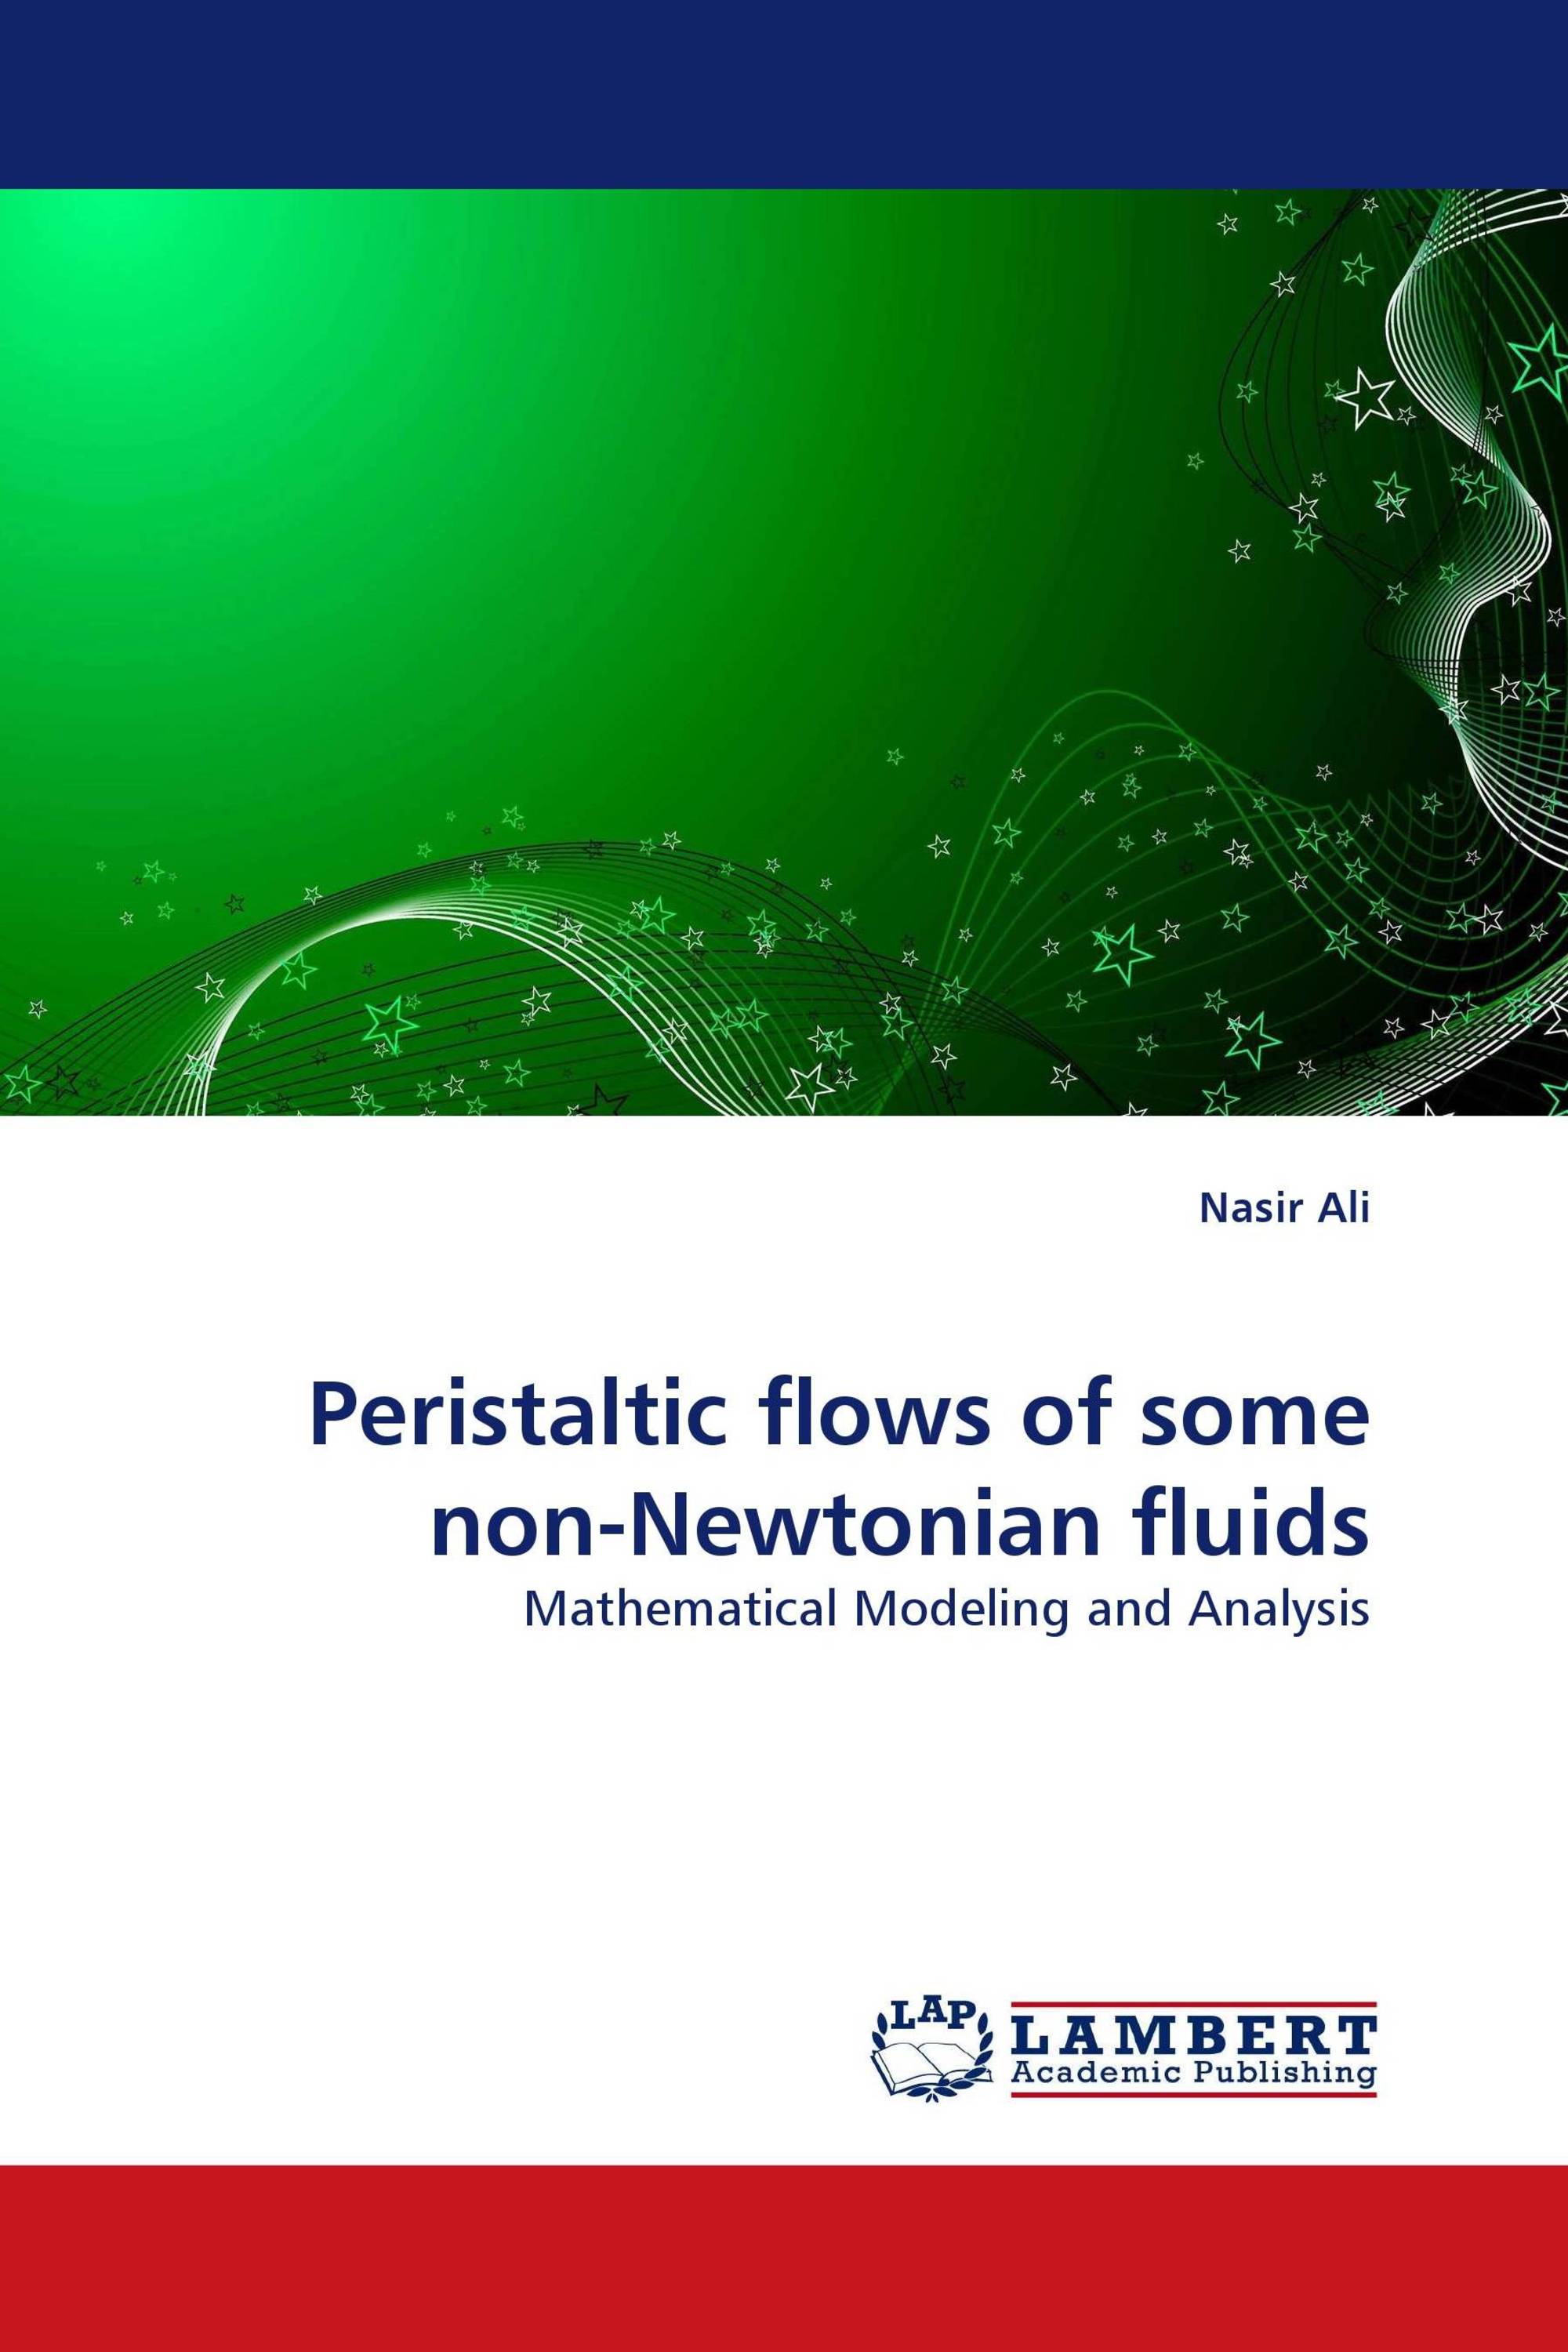 Flow some. Peristalsis.